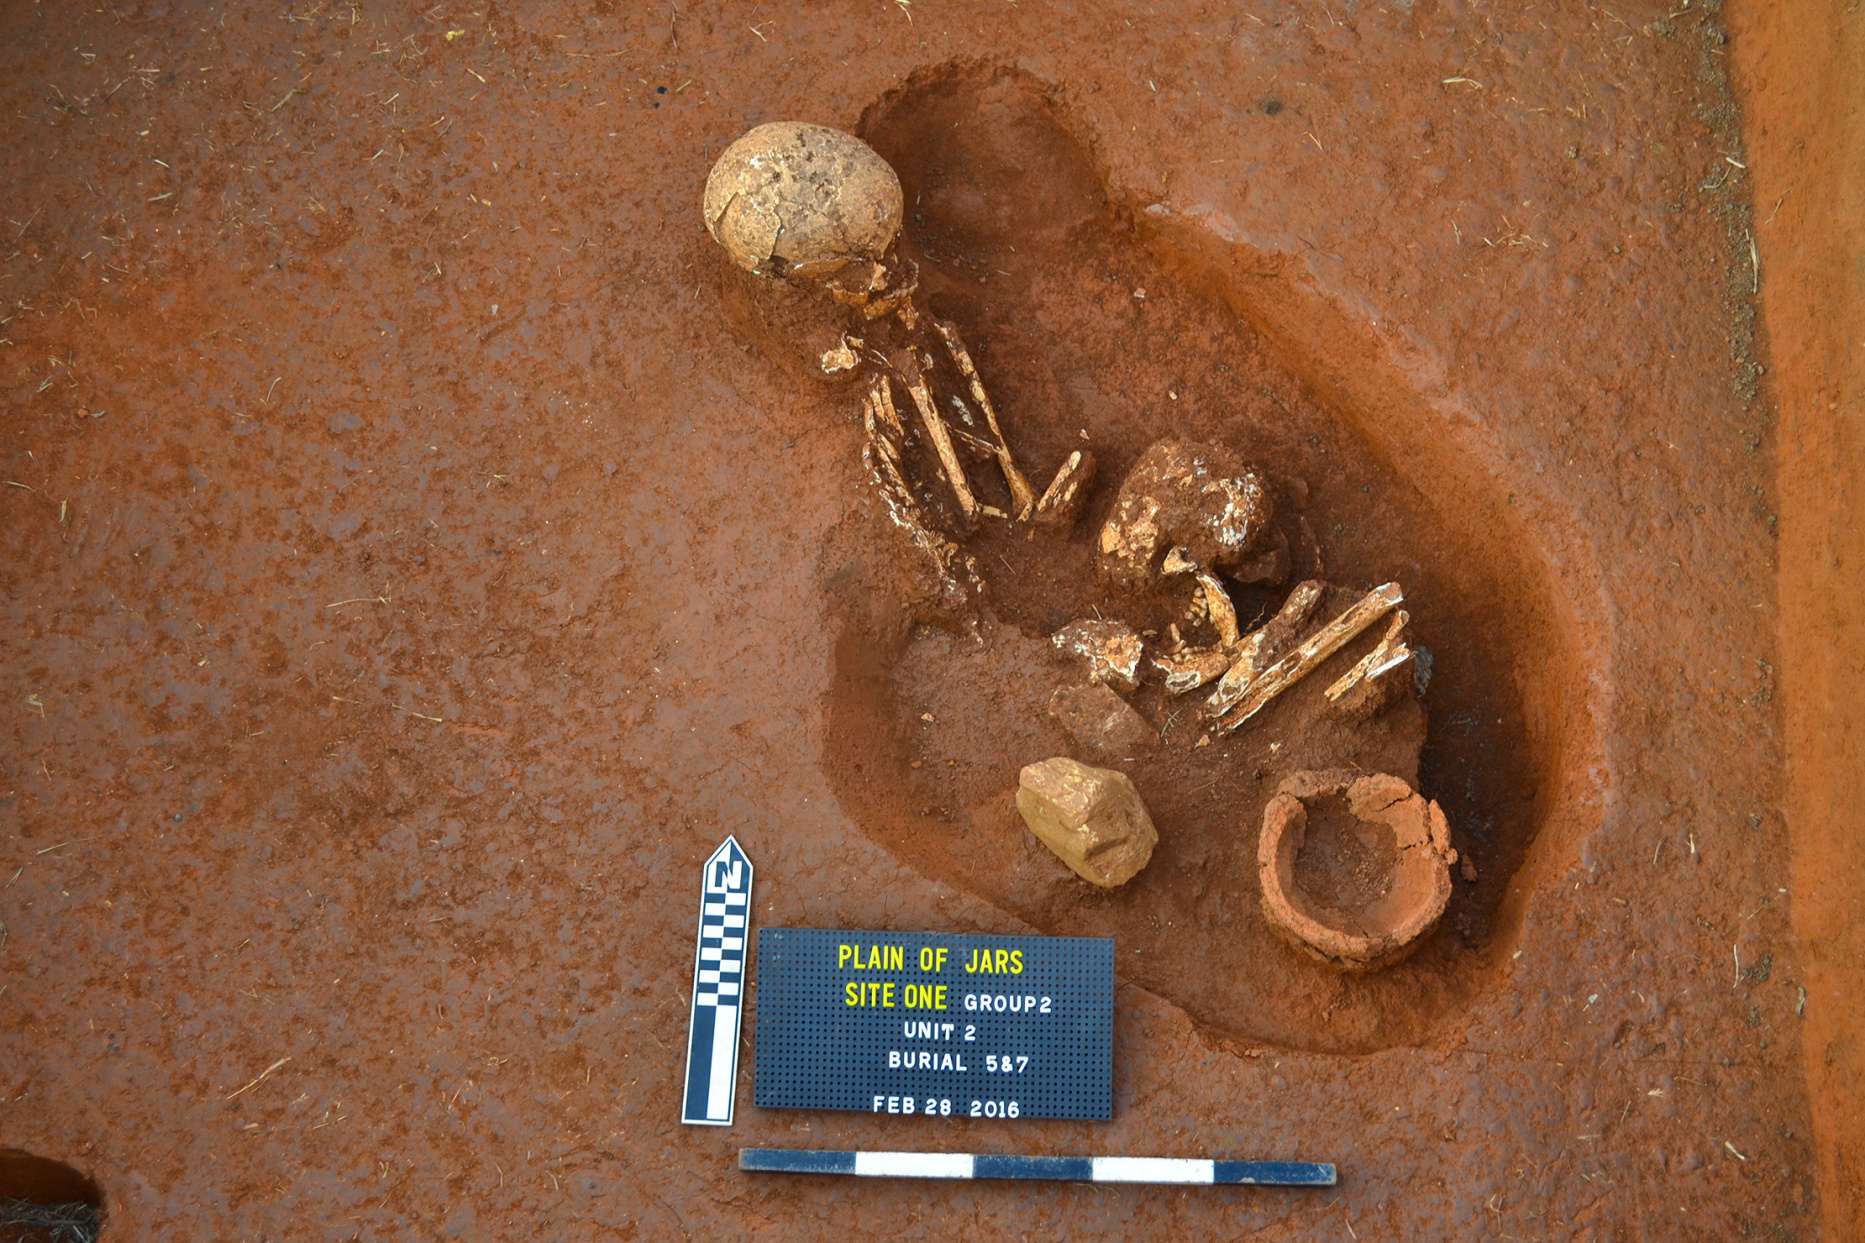 New research shows the human remains were interred beside the jars between 700 and 1,200 years ago.